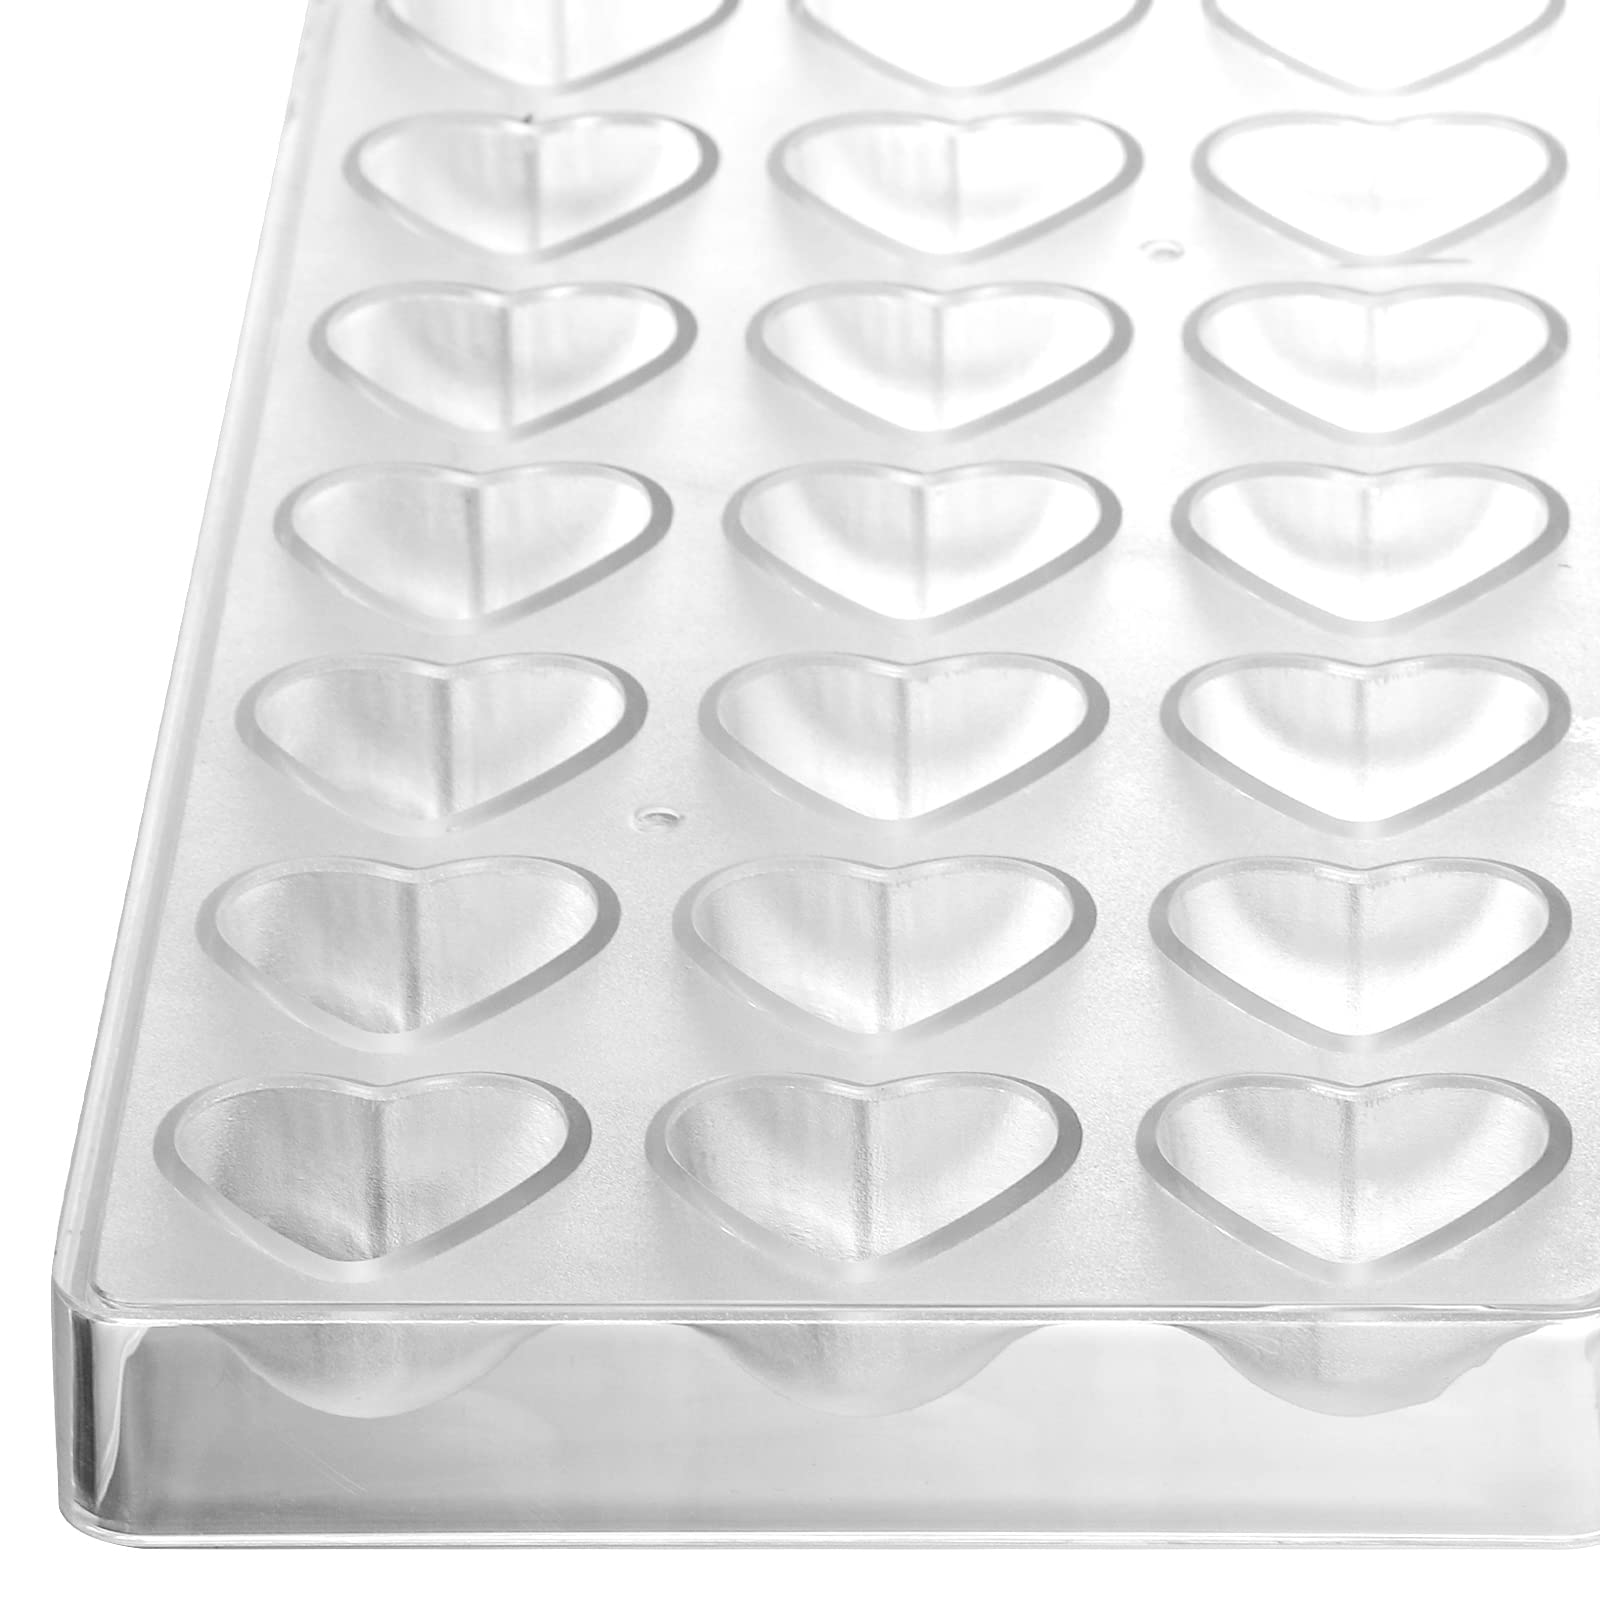 ZEAYEA 4 Pack Polycarbonate Chocolate Mold, Candy Making Mold, DIY Mold Cookie Tray for Mousse, Jelly, Candy, Chocolate, Cup, Heart, Rose, Crown Shape